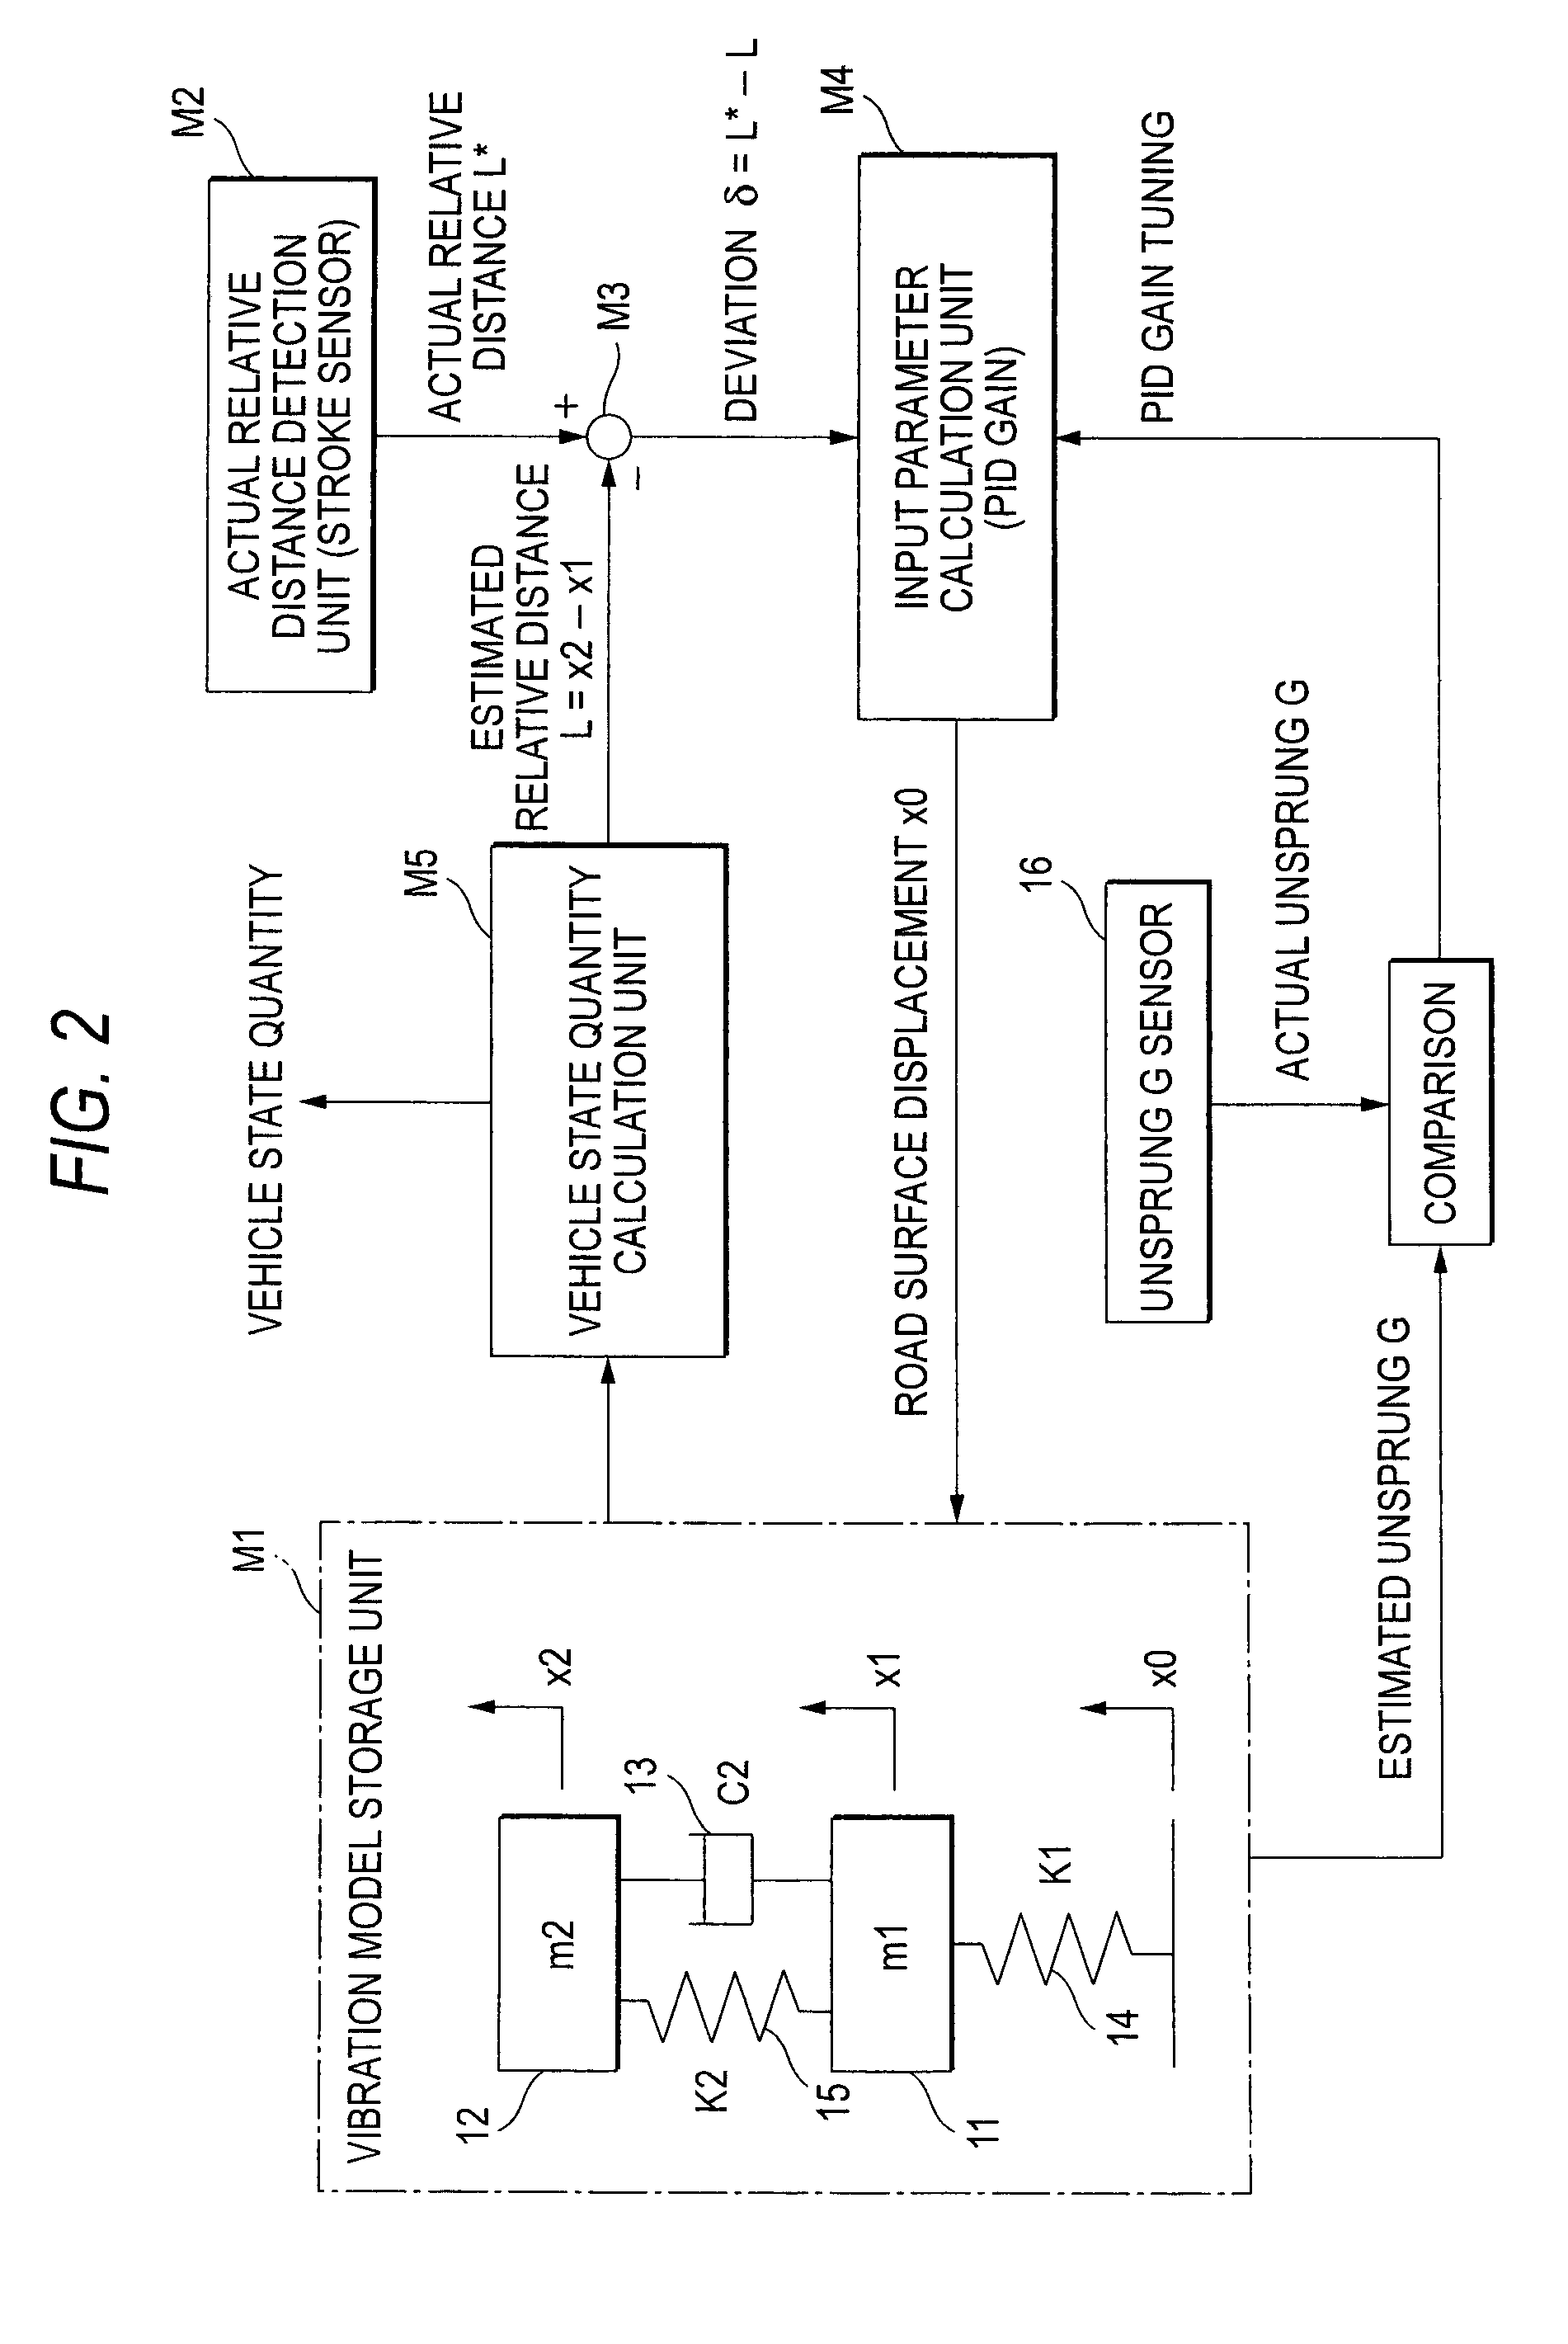 Vehicle state estimation system